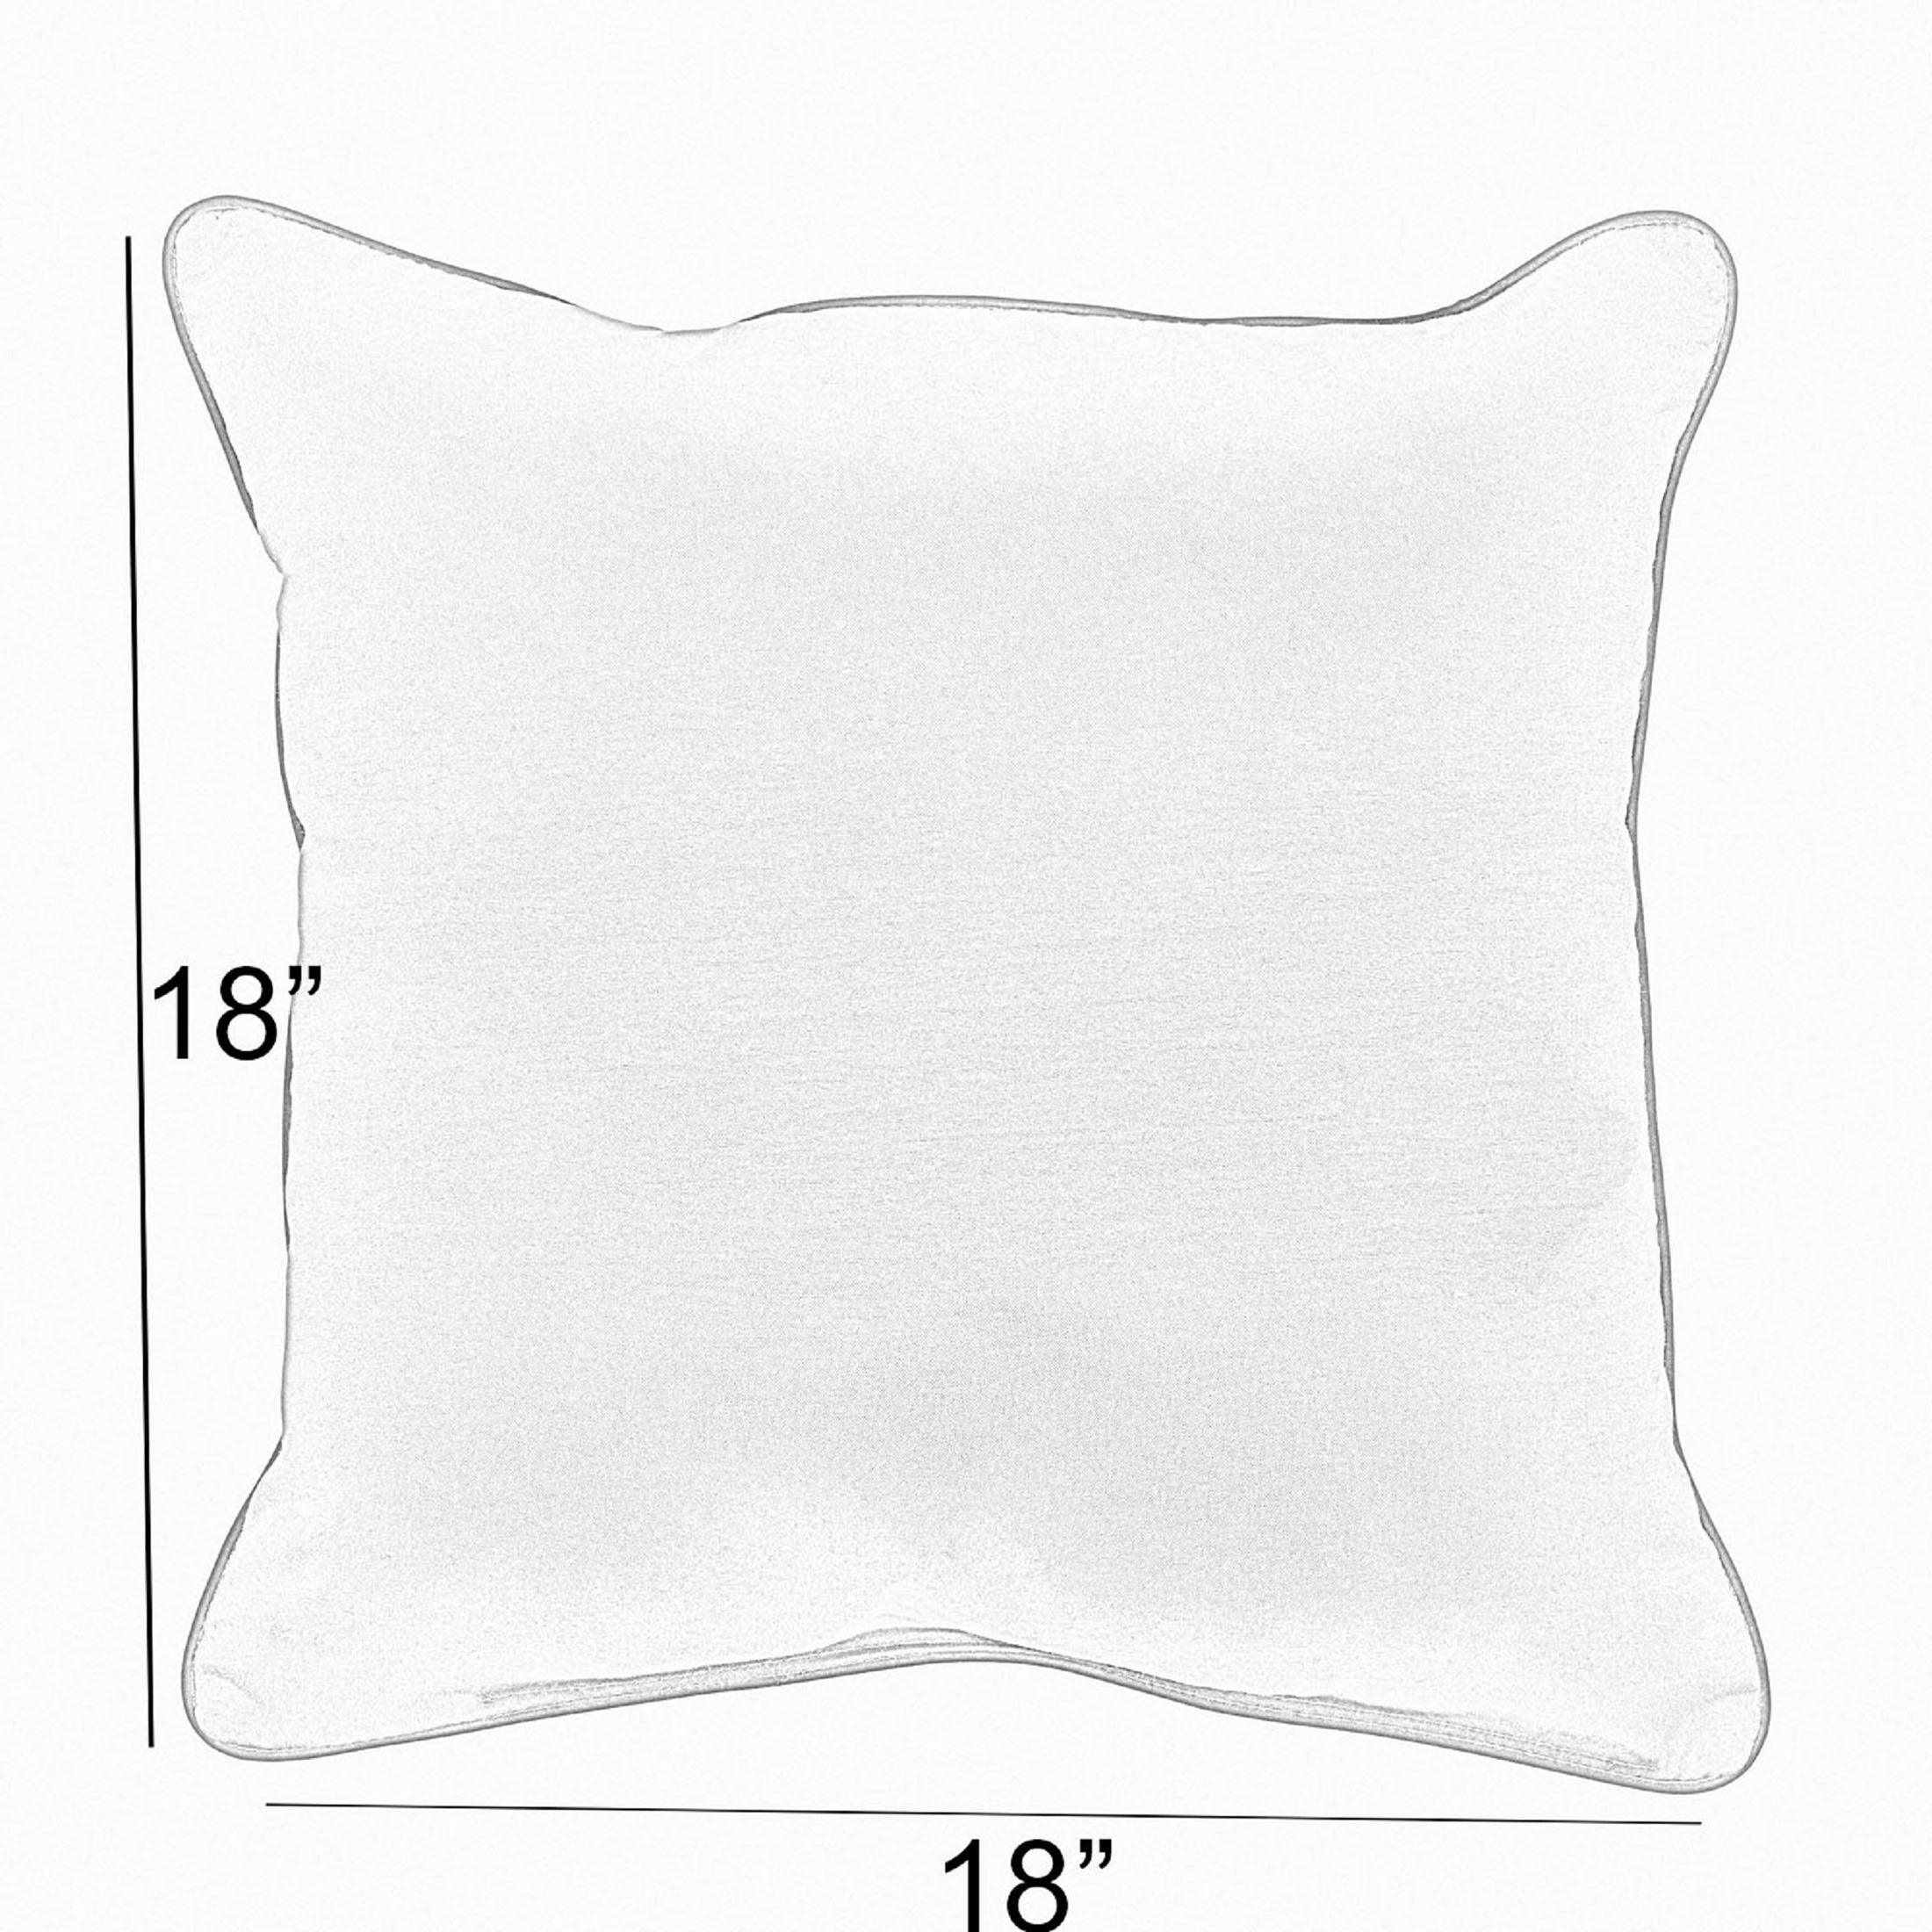 Sunbrella Pillow with Large Flange (Set of 2) - Sorra Home